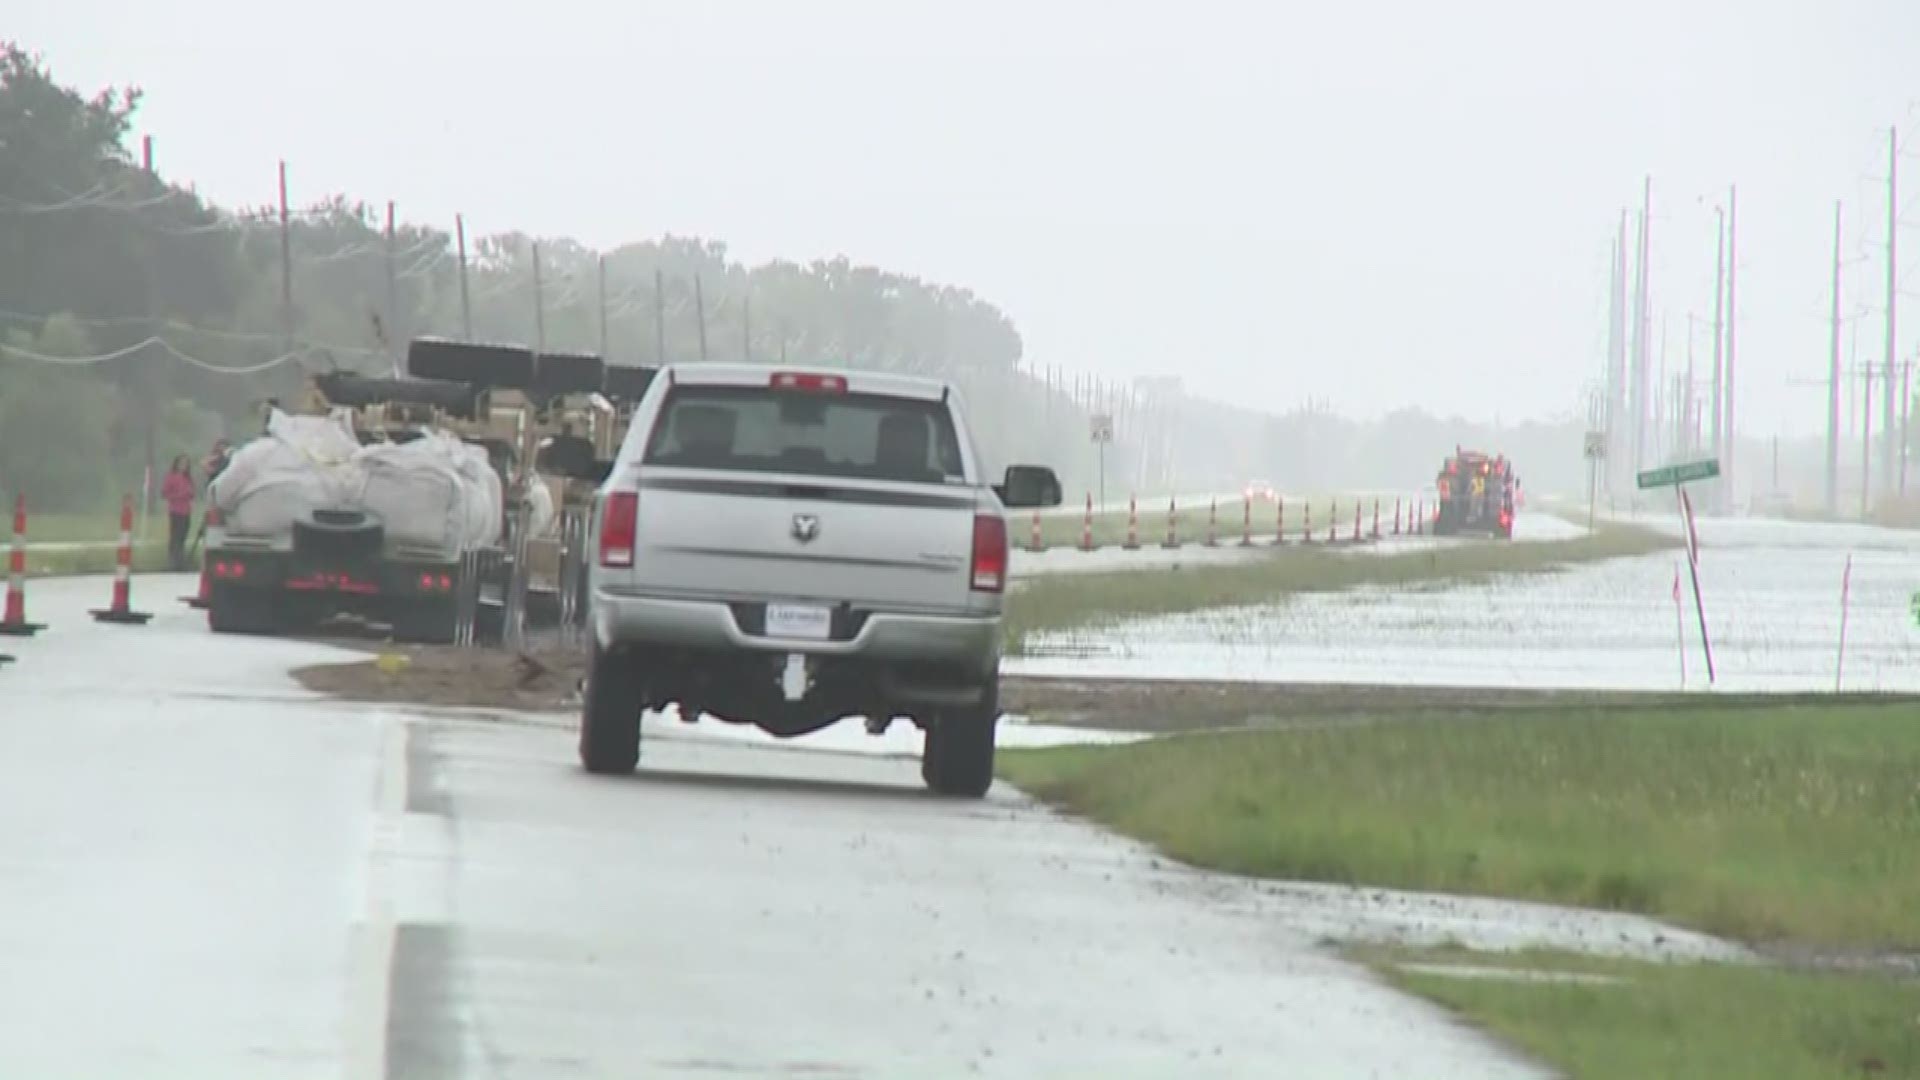 Plaquemines Parish continues to see flooding. Belle Chasse Highway is expected to close at 8 p.m.